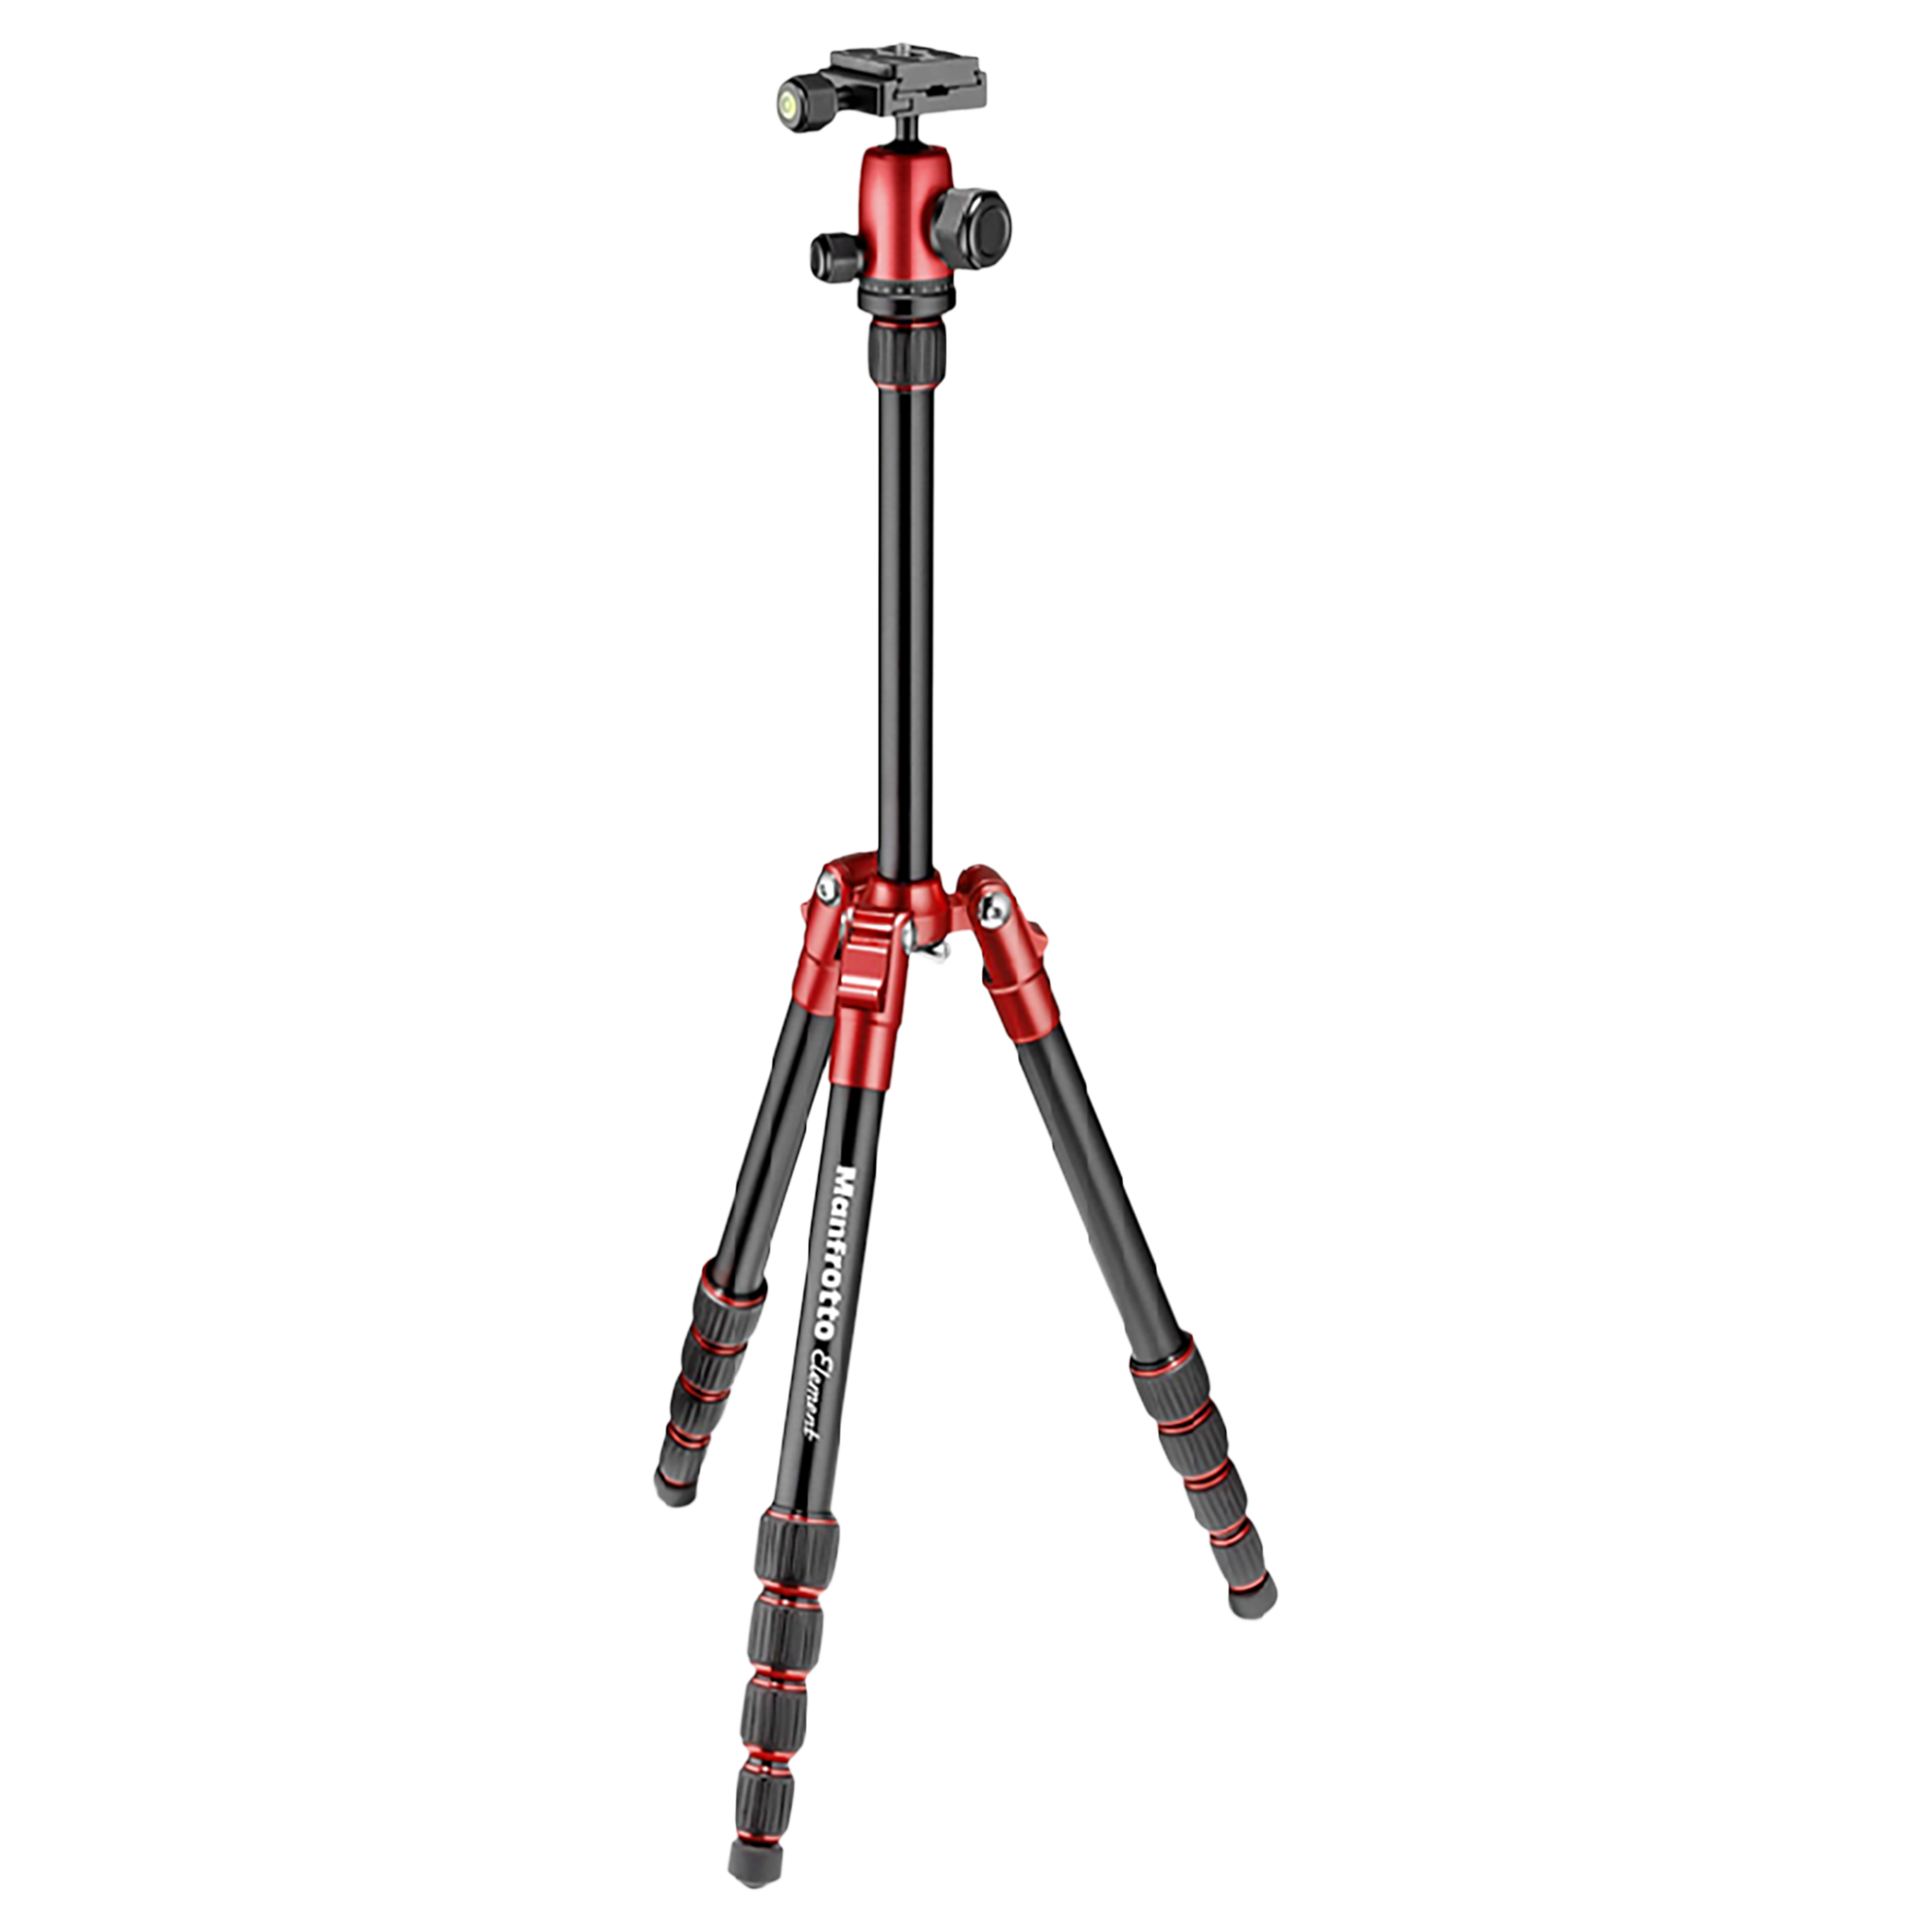 Manfrotto Element 143cm Adjustable Tripod for Camera (360 Degree Panoramic Rotation, Red)